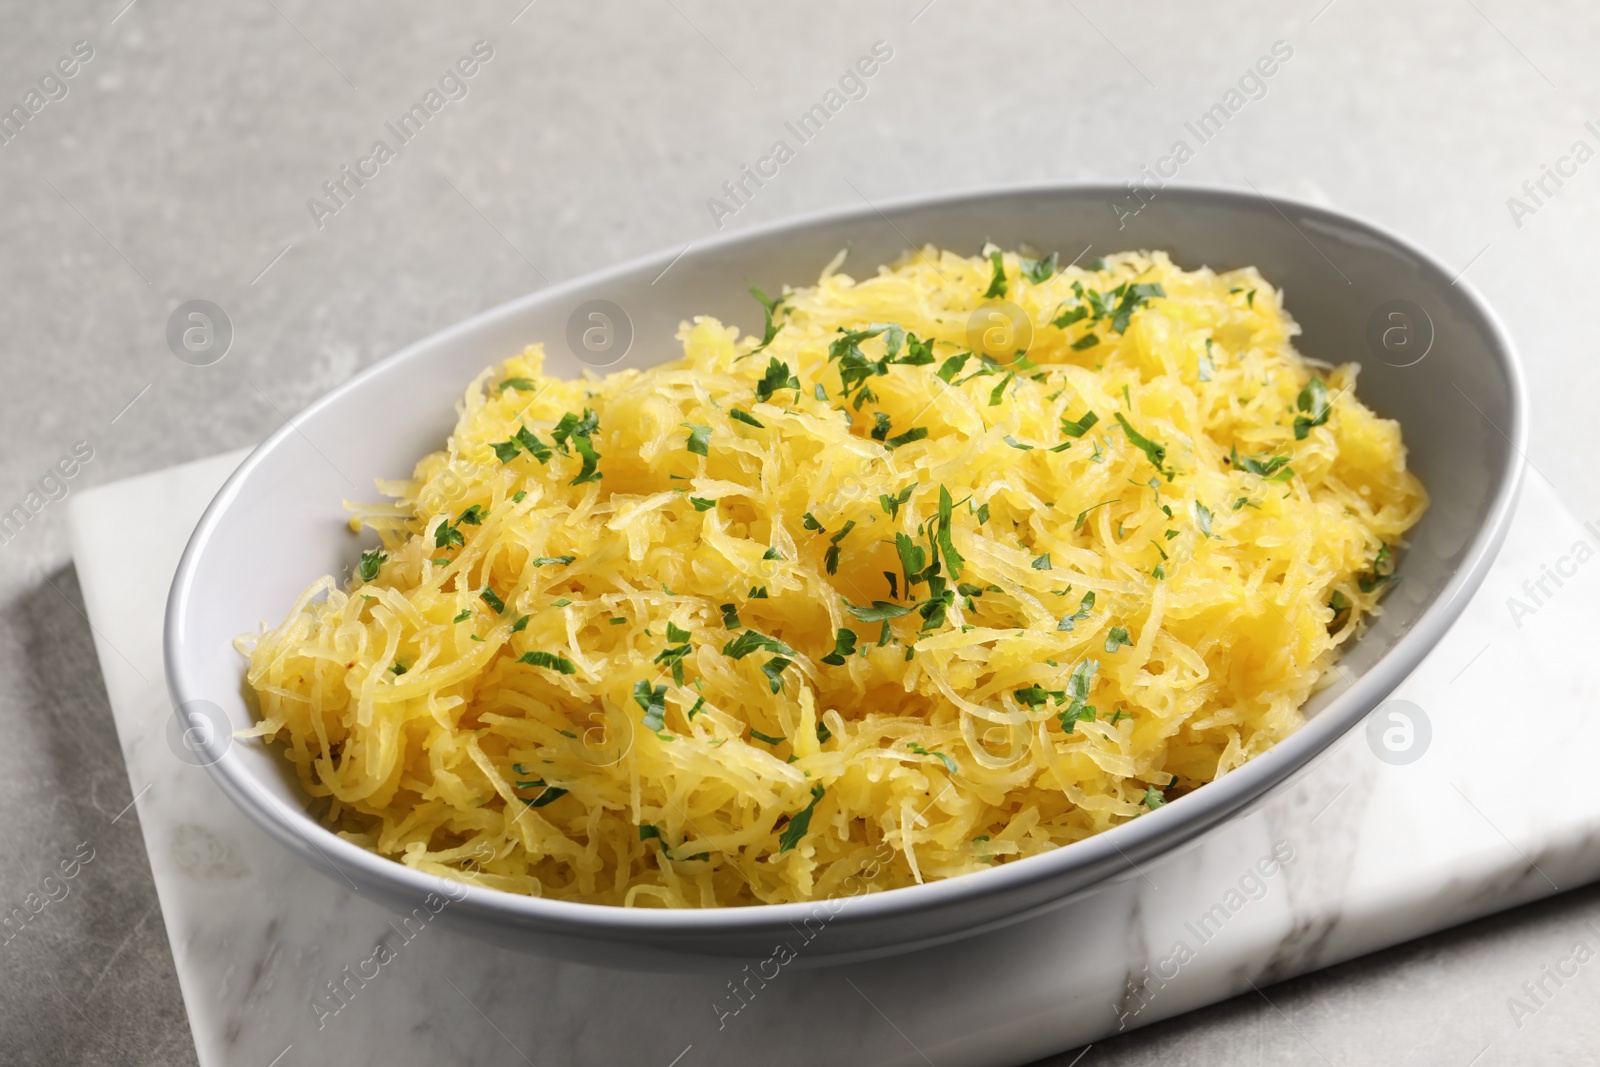 Photo of Bowl with cooked spaghetti squash on light background